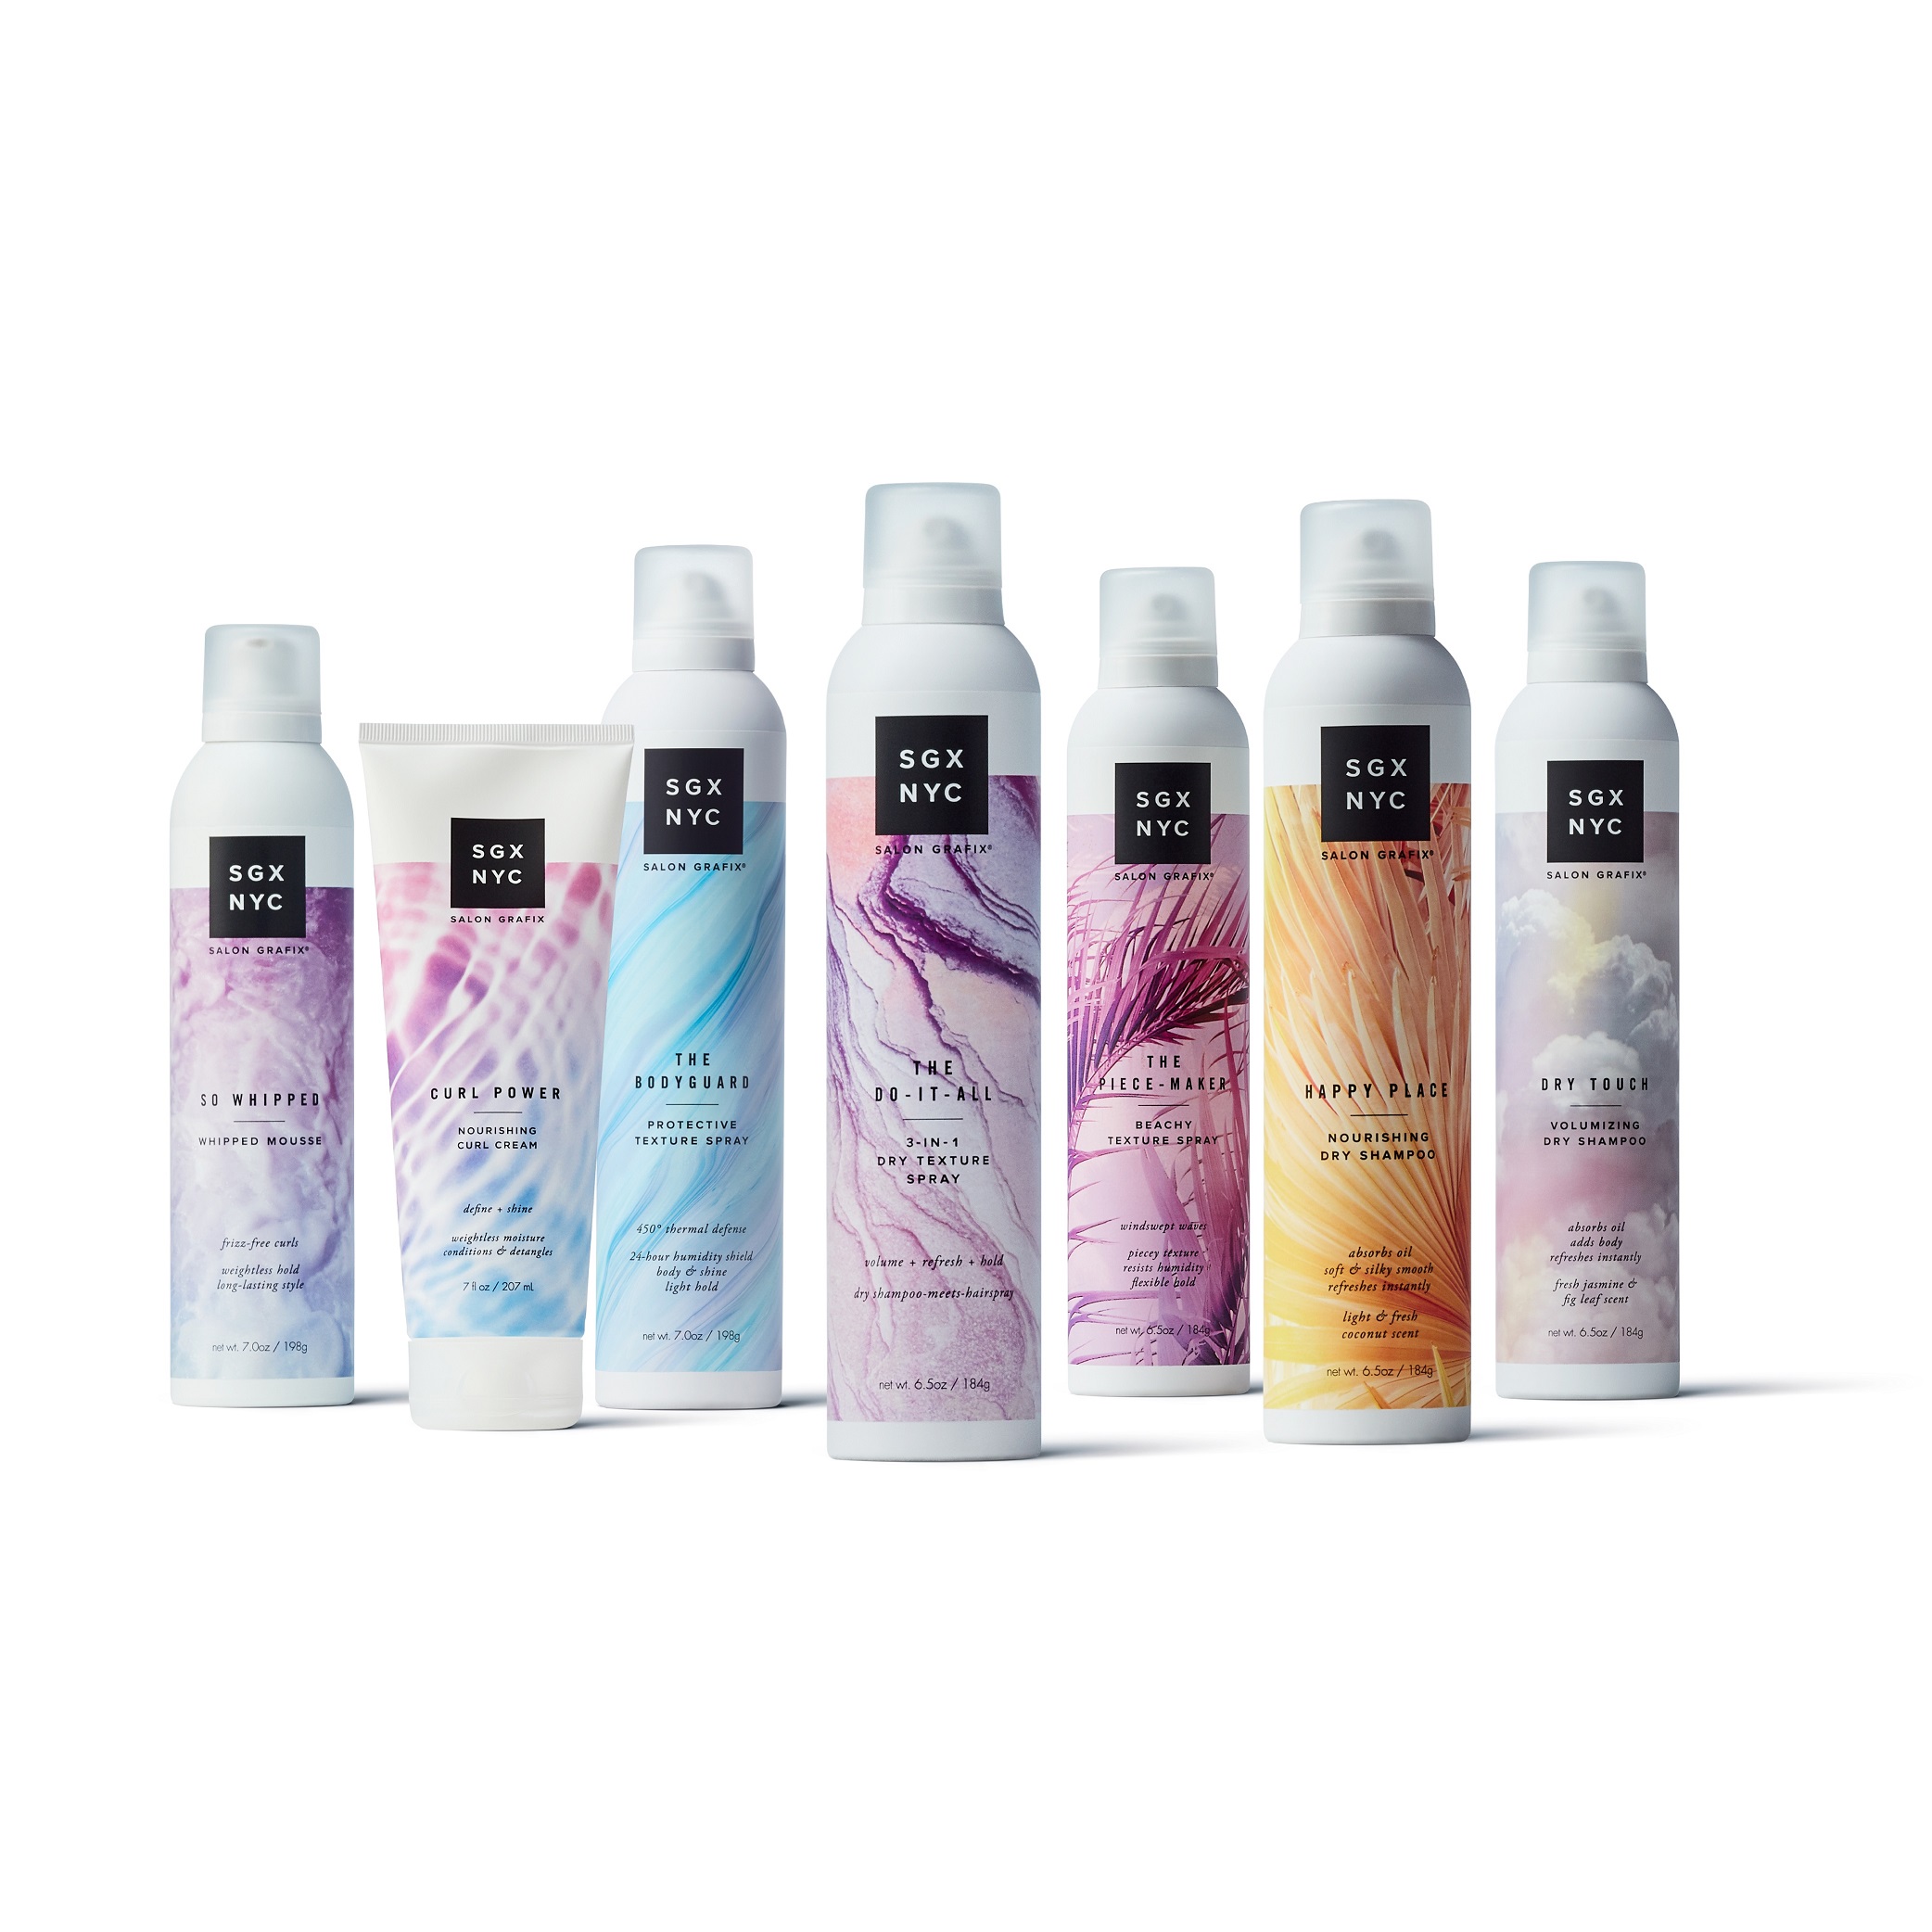 SGX NYC So Whipped Mousse For Nonstop Curls And Waves - image 4 of 6